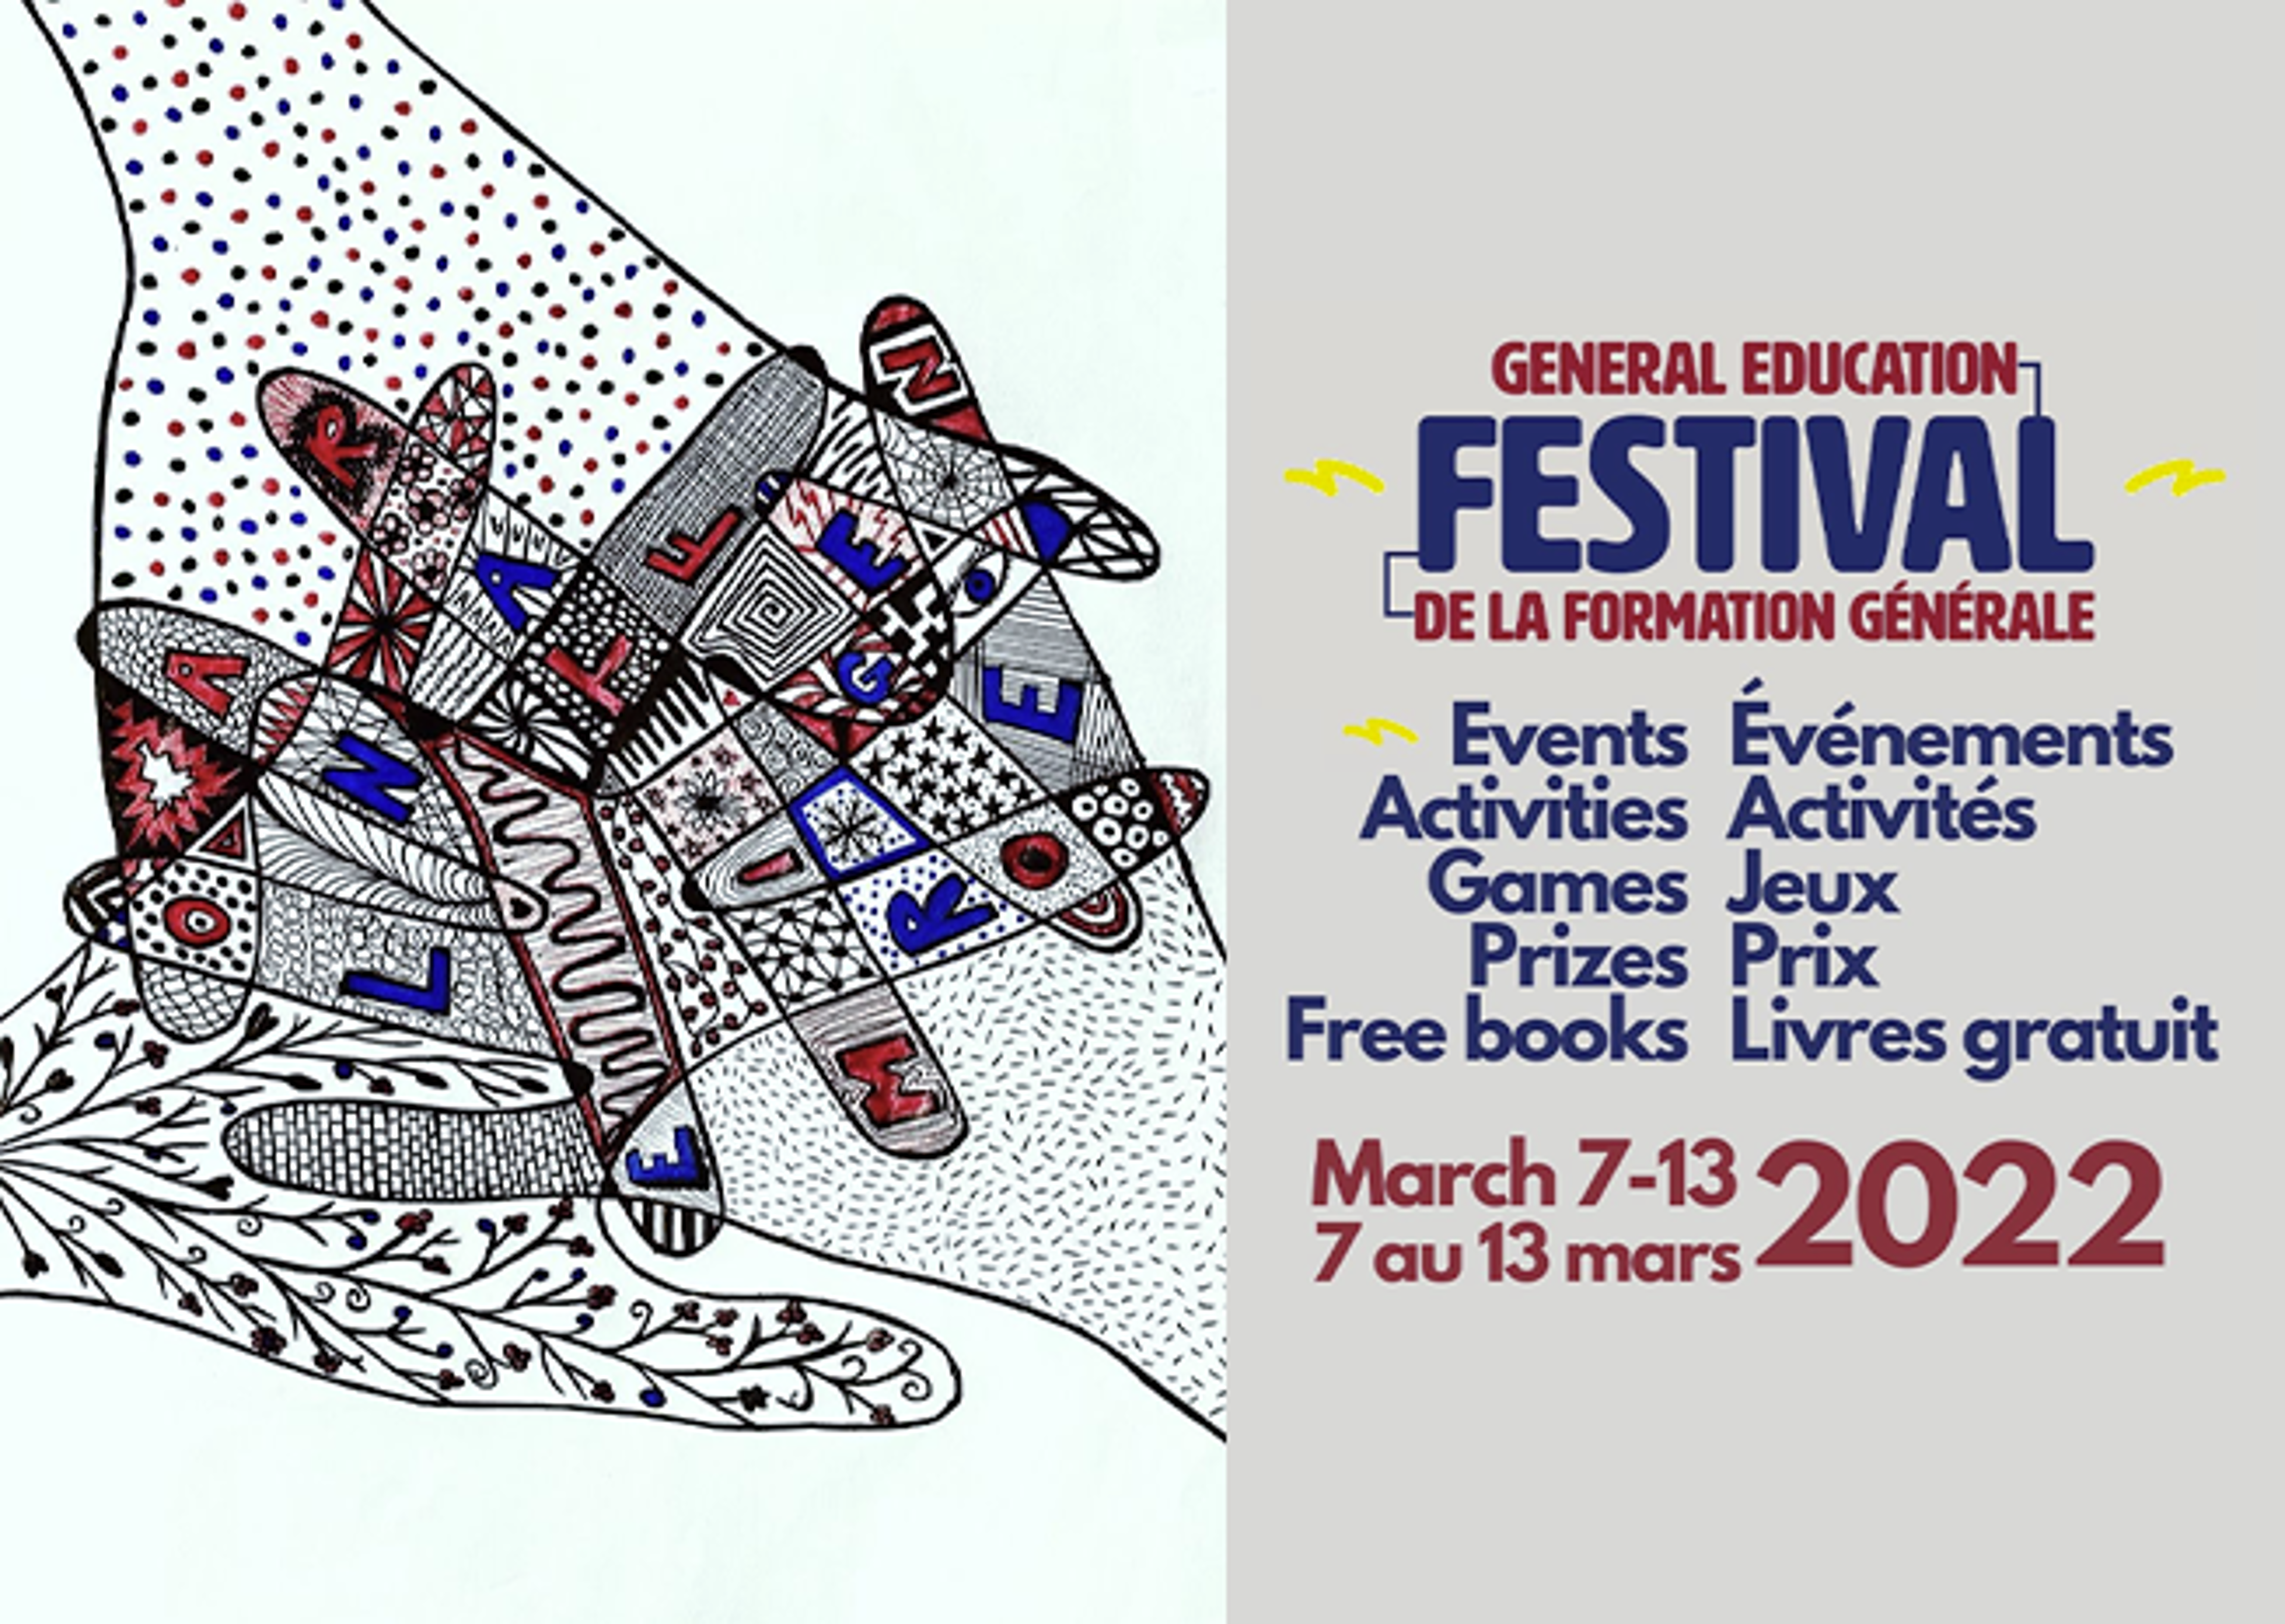 A promotional poster for a General Education Festival featuring a stylized sneaker with intricate patterns, listing events, activities, games, prizes, and free books from March 7-13, 2022.